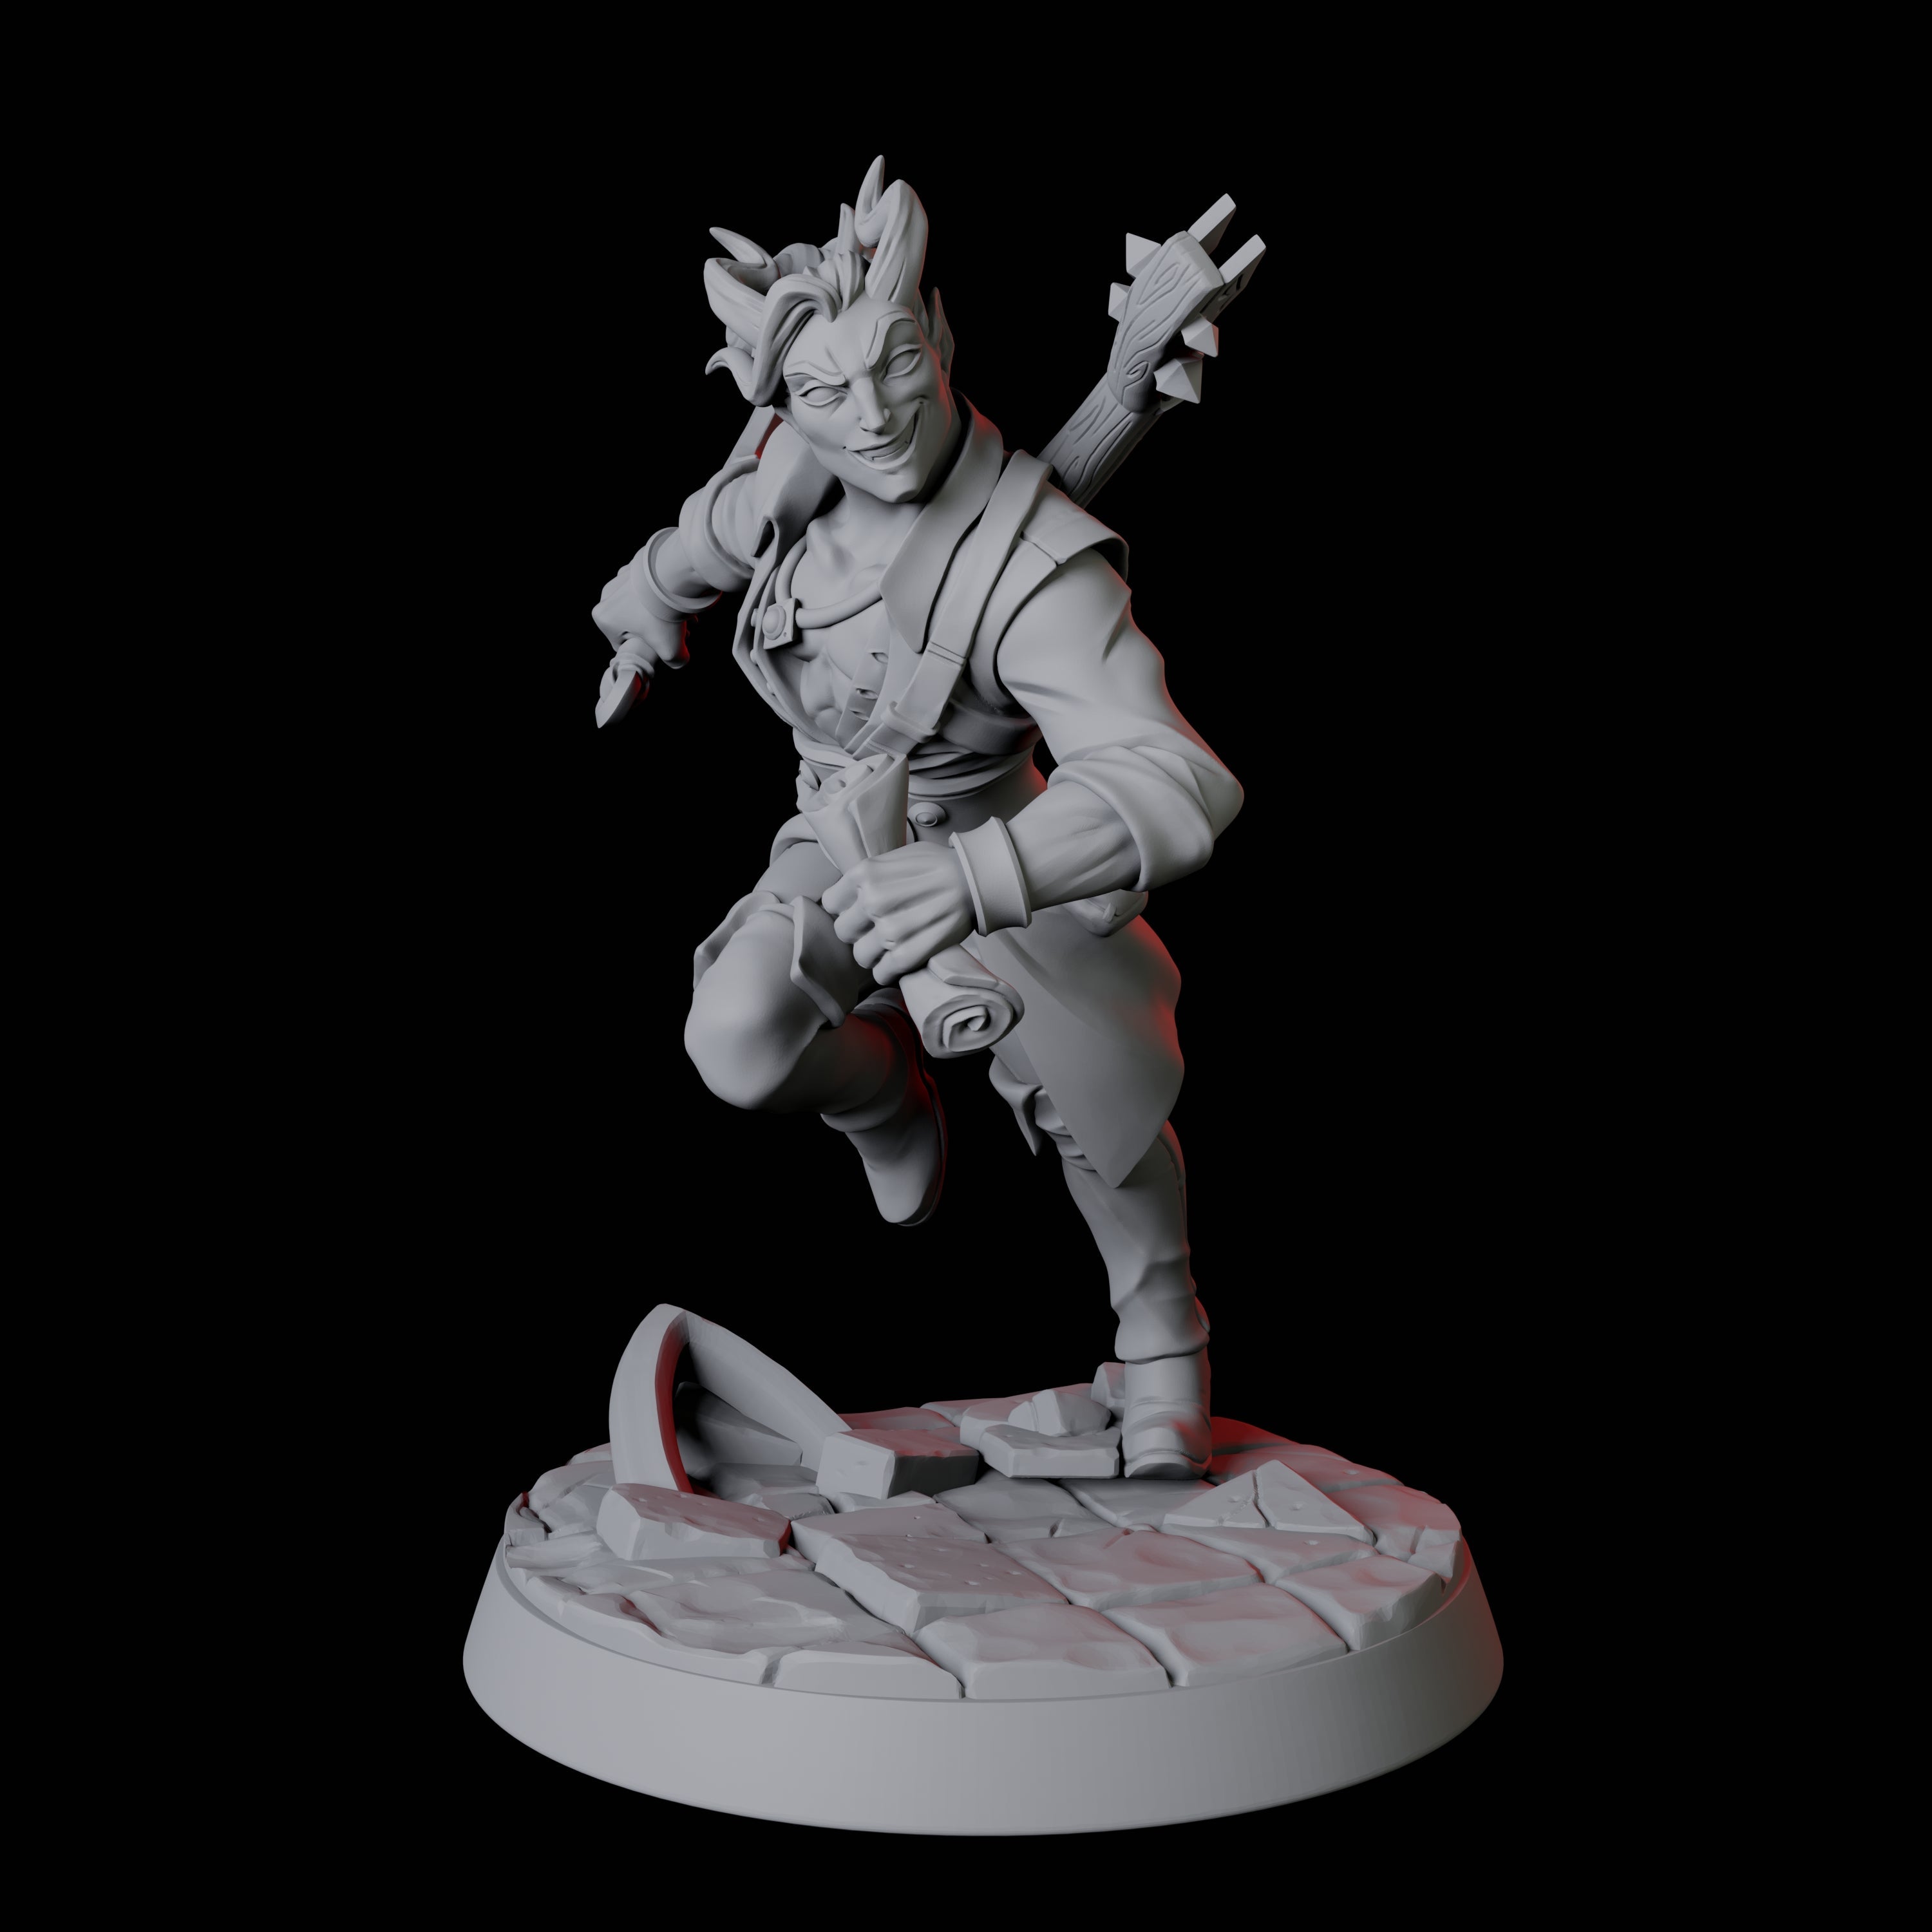 Tiefling Bard A Miniature for Dungeons and Dragons, Pathfinder or other TTRPGs